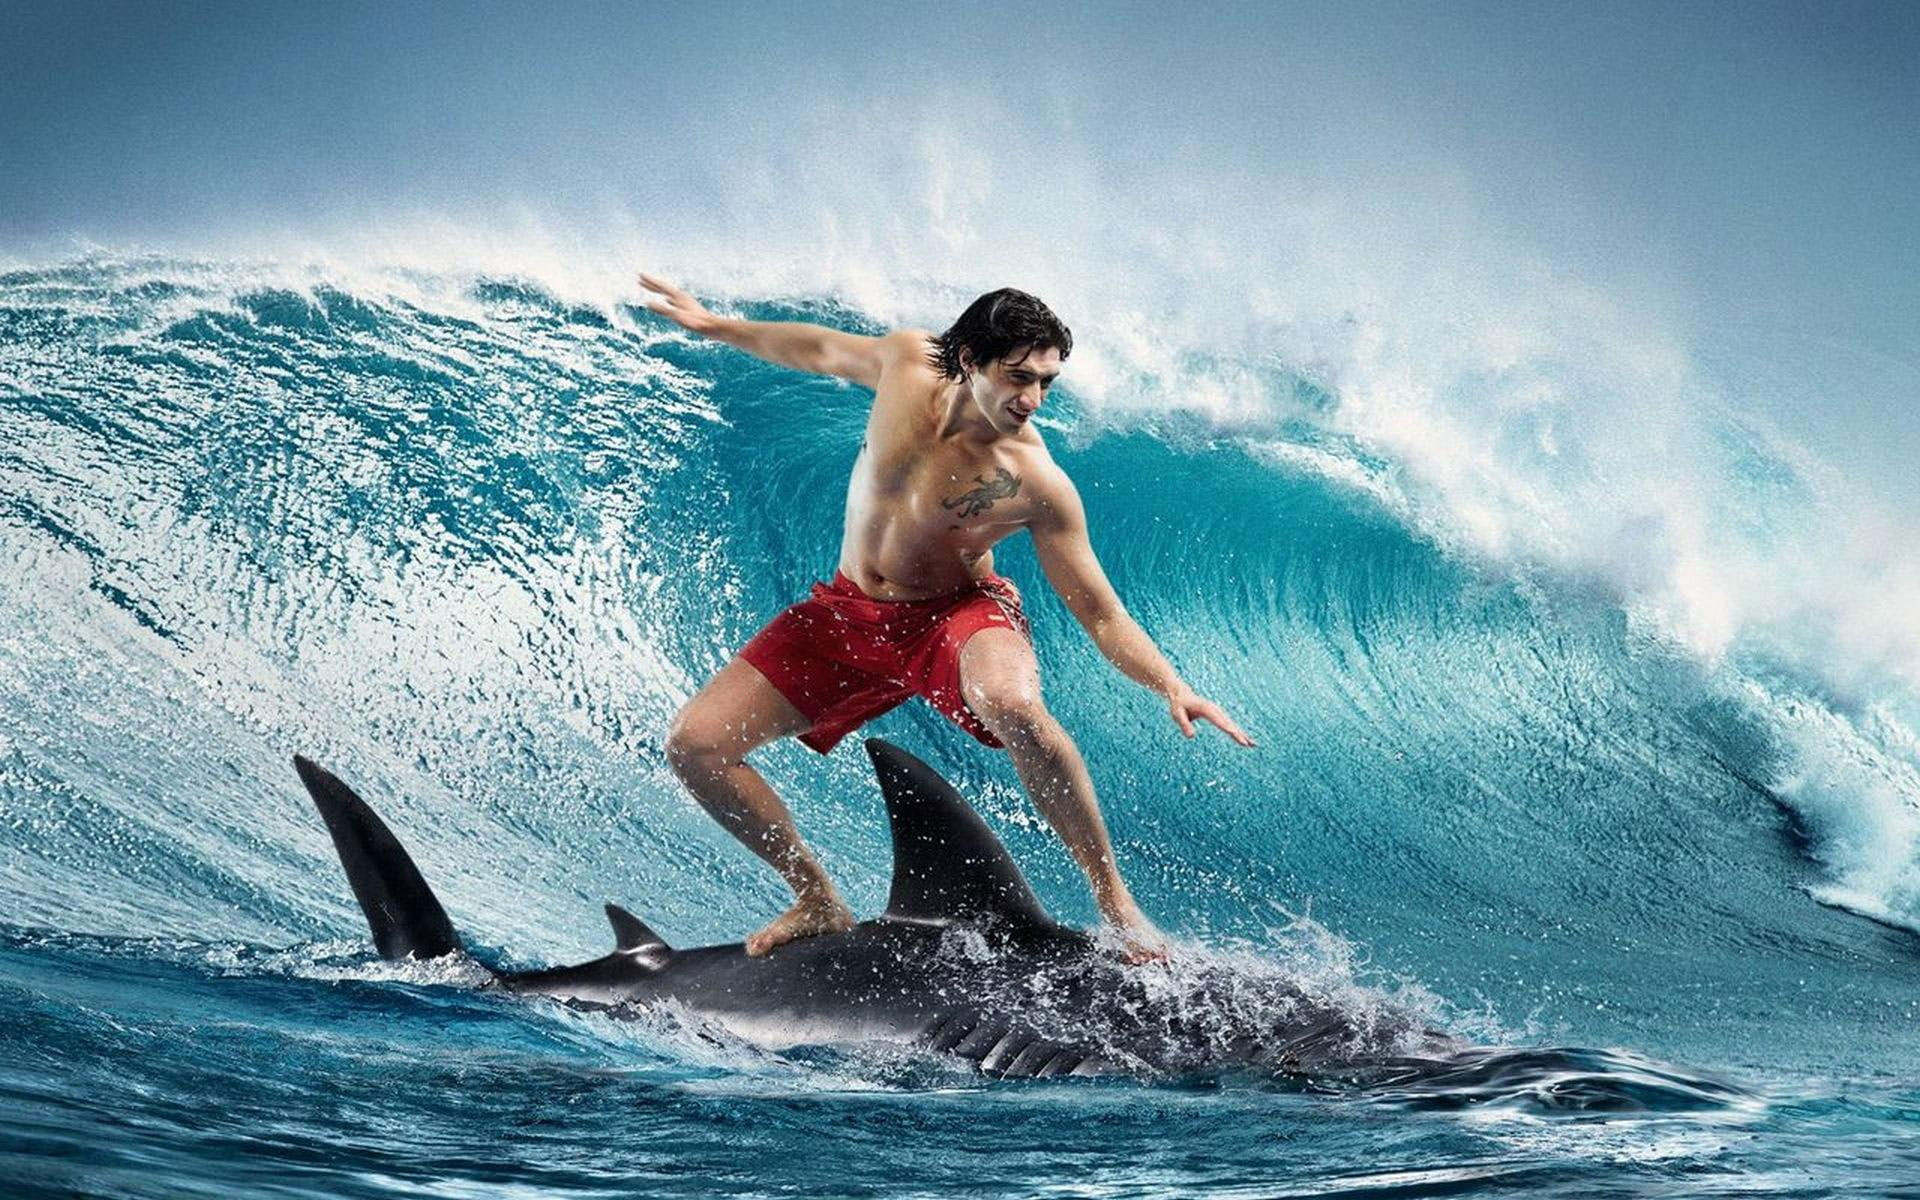 Surfing, men's red shorts, sports, abstract, fantasy, courage